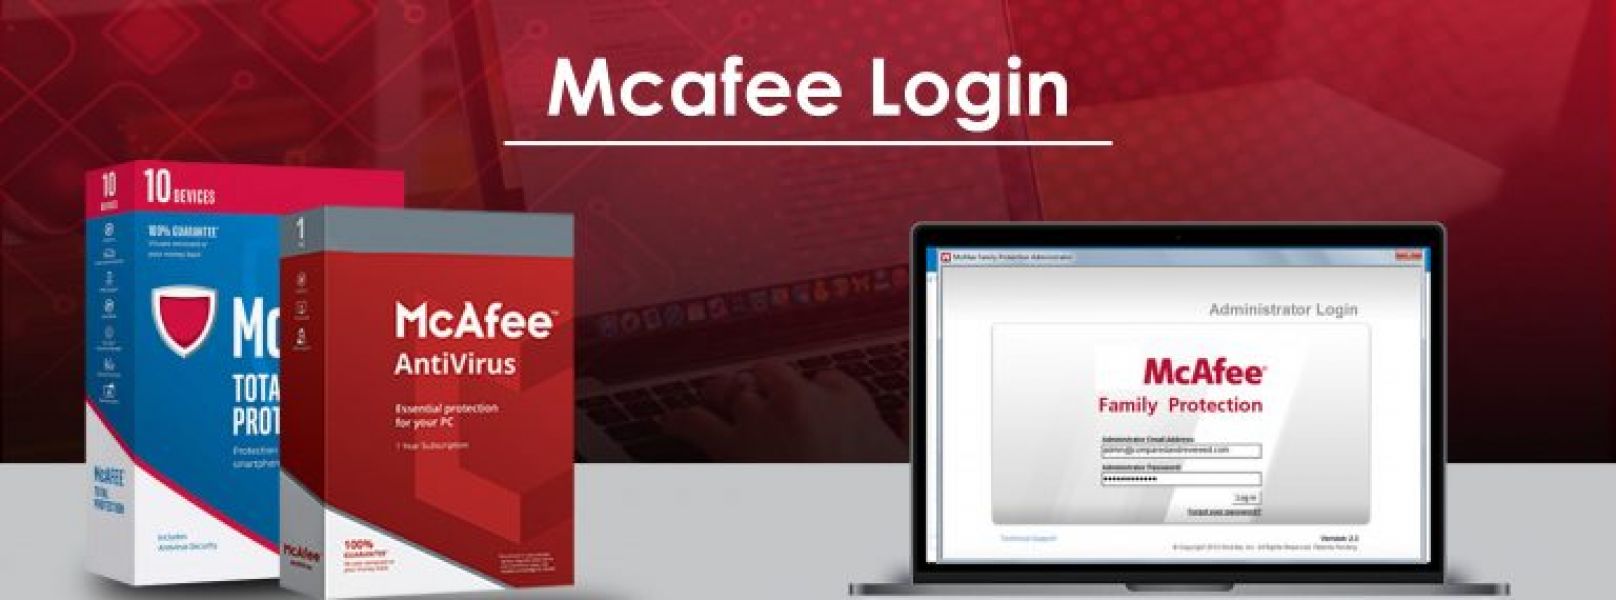 McAfee.com/Activate - Enter your 25-digit activation code - Help McAfee